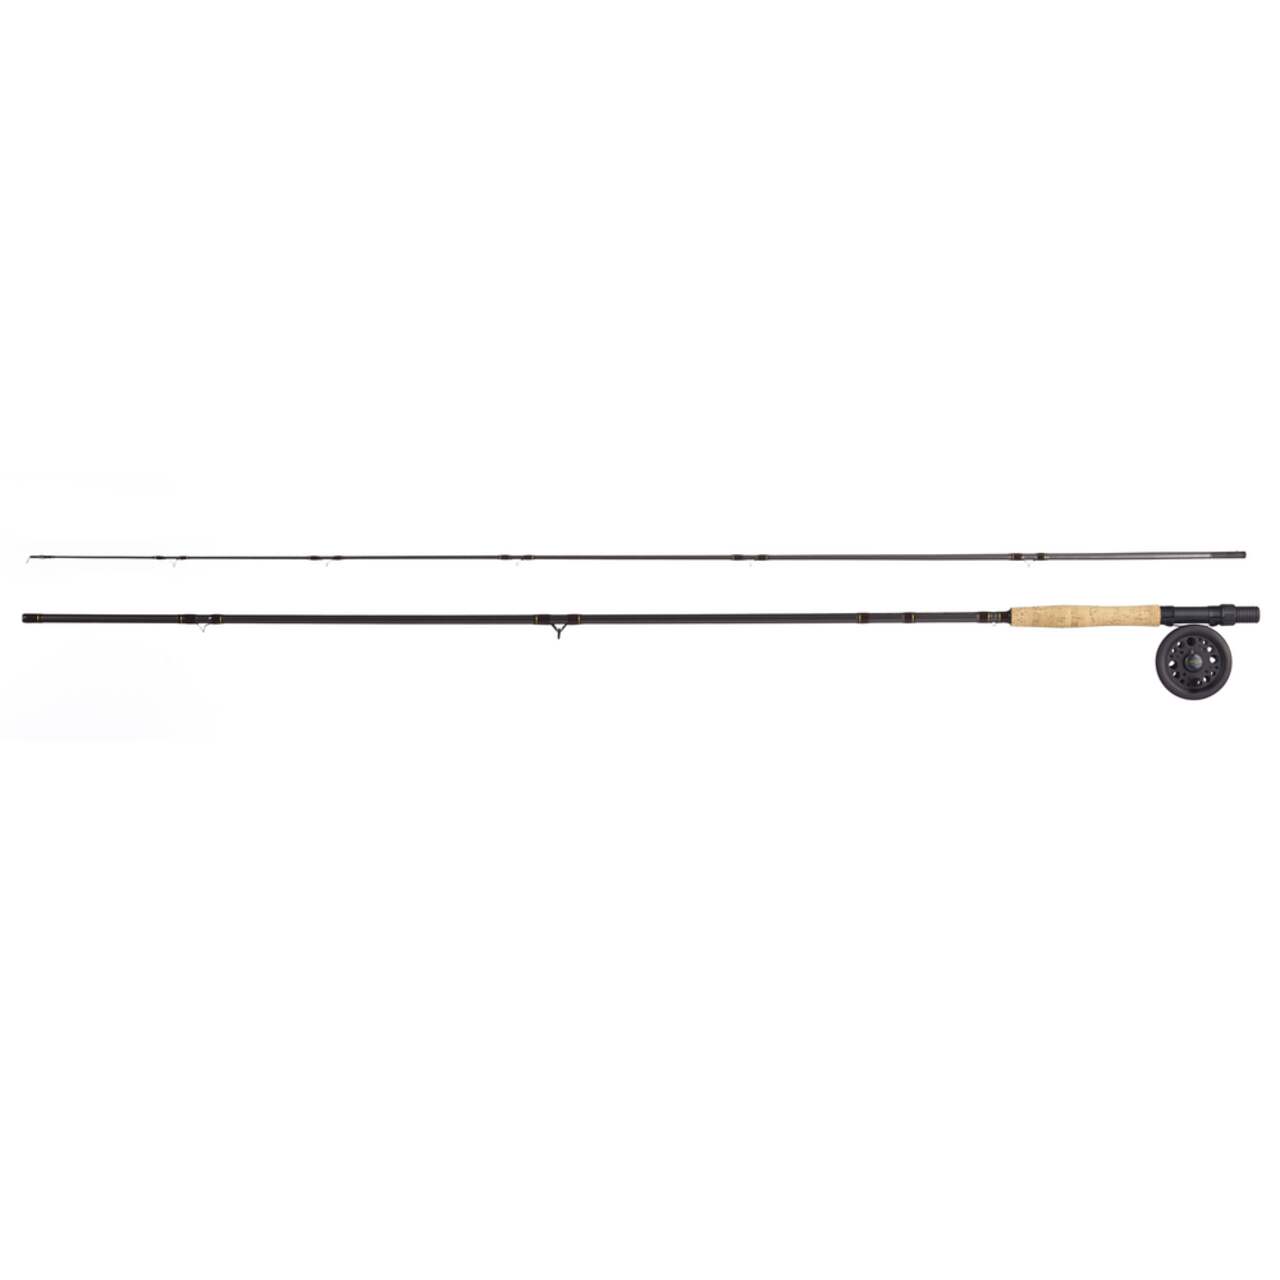 MARTIN complete fly-fishing kit